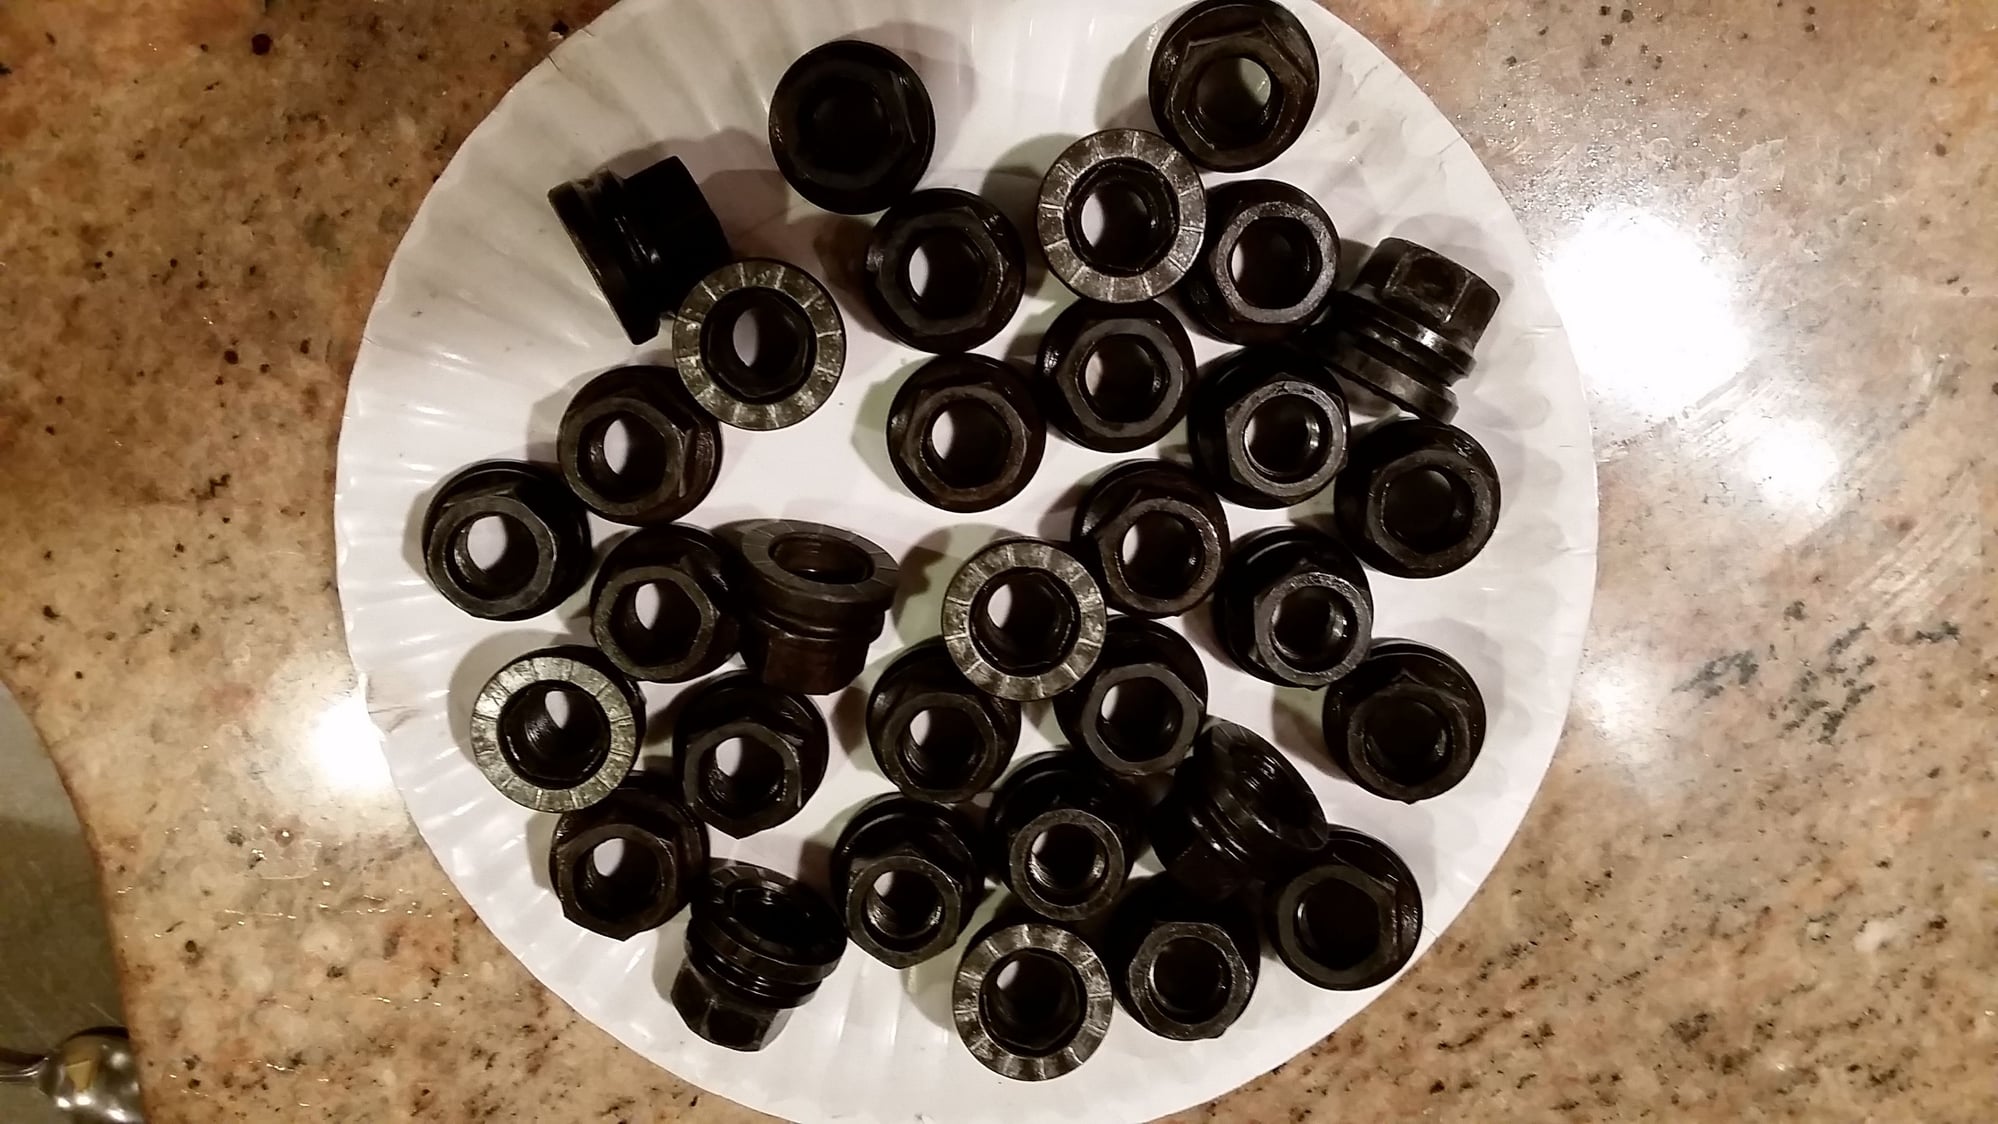 Wheels and Tires/Axles - Set of 32 lug nuts M14-1.5 for Excursion or Super Duty - Used - 2003 to 2005 Ford Excursion - Newfoundland, PA 18445, United States